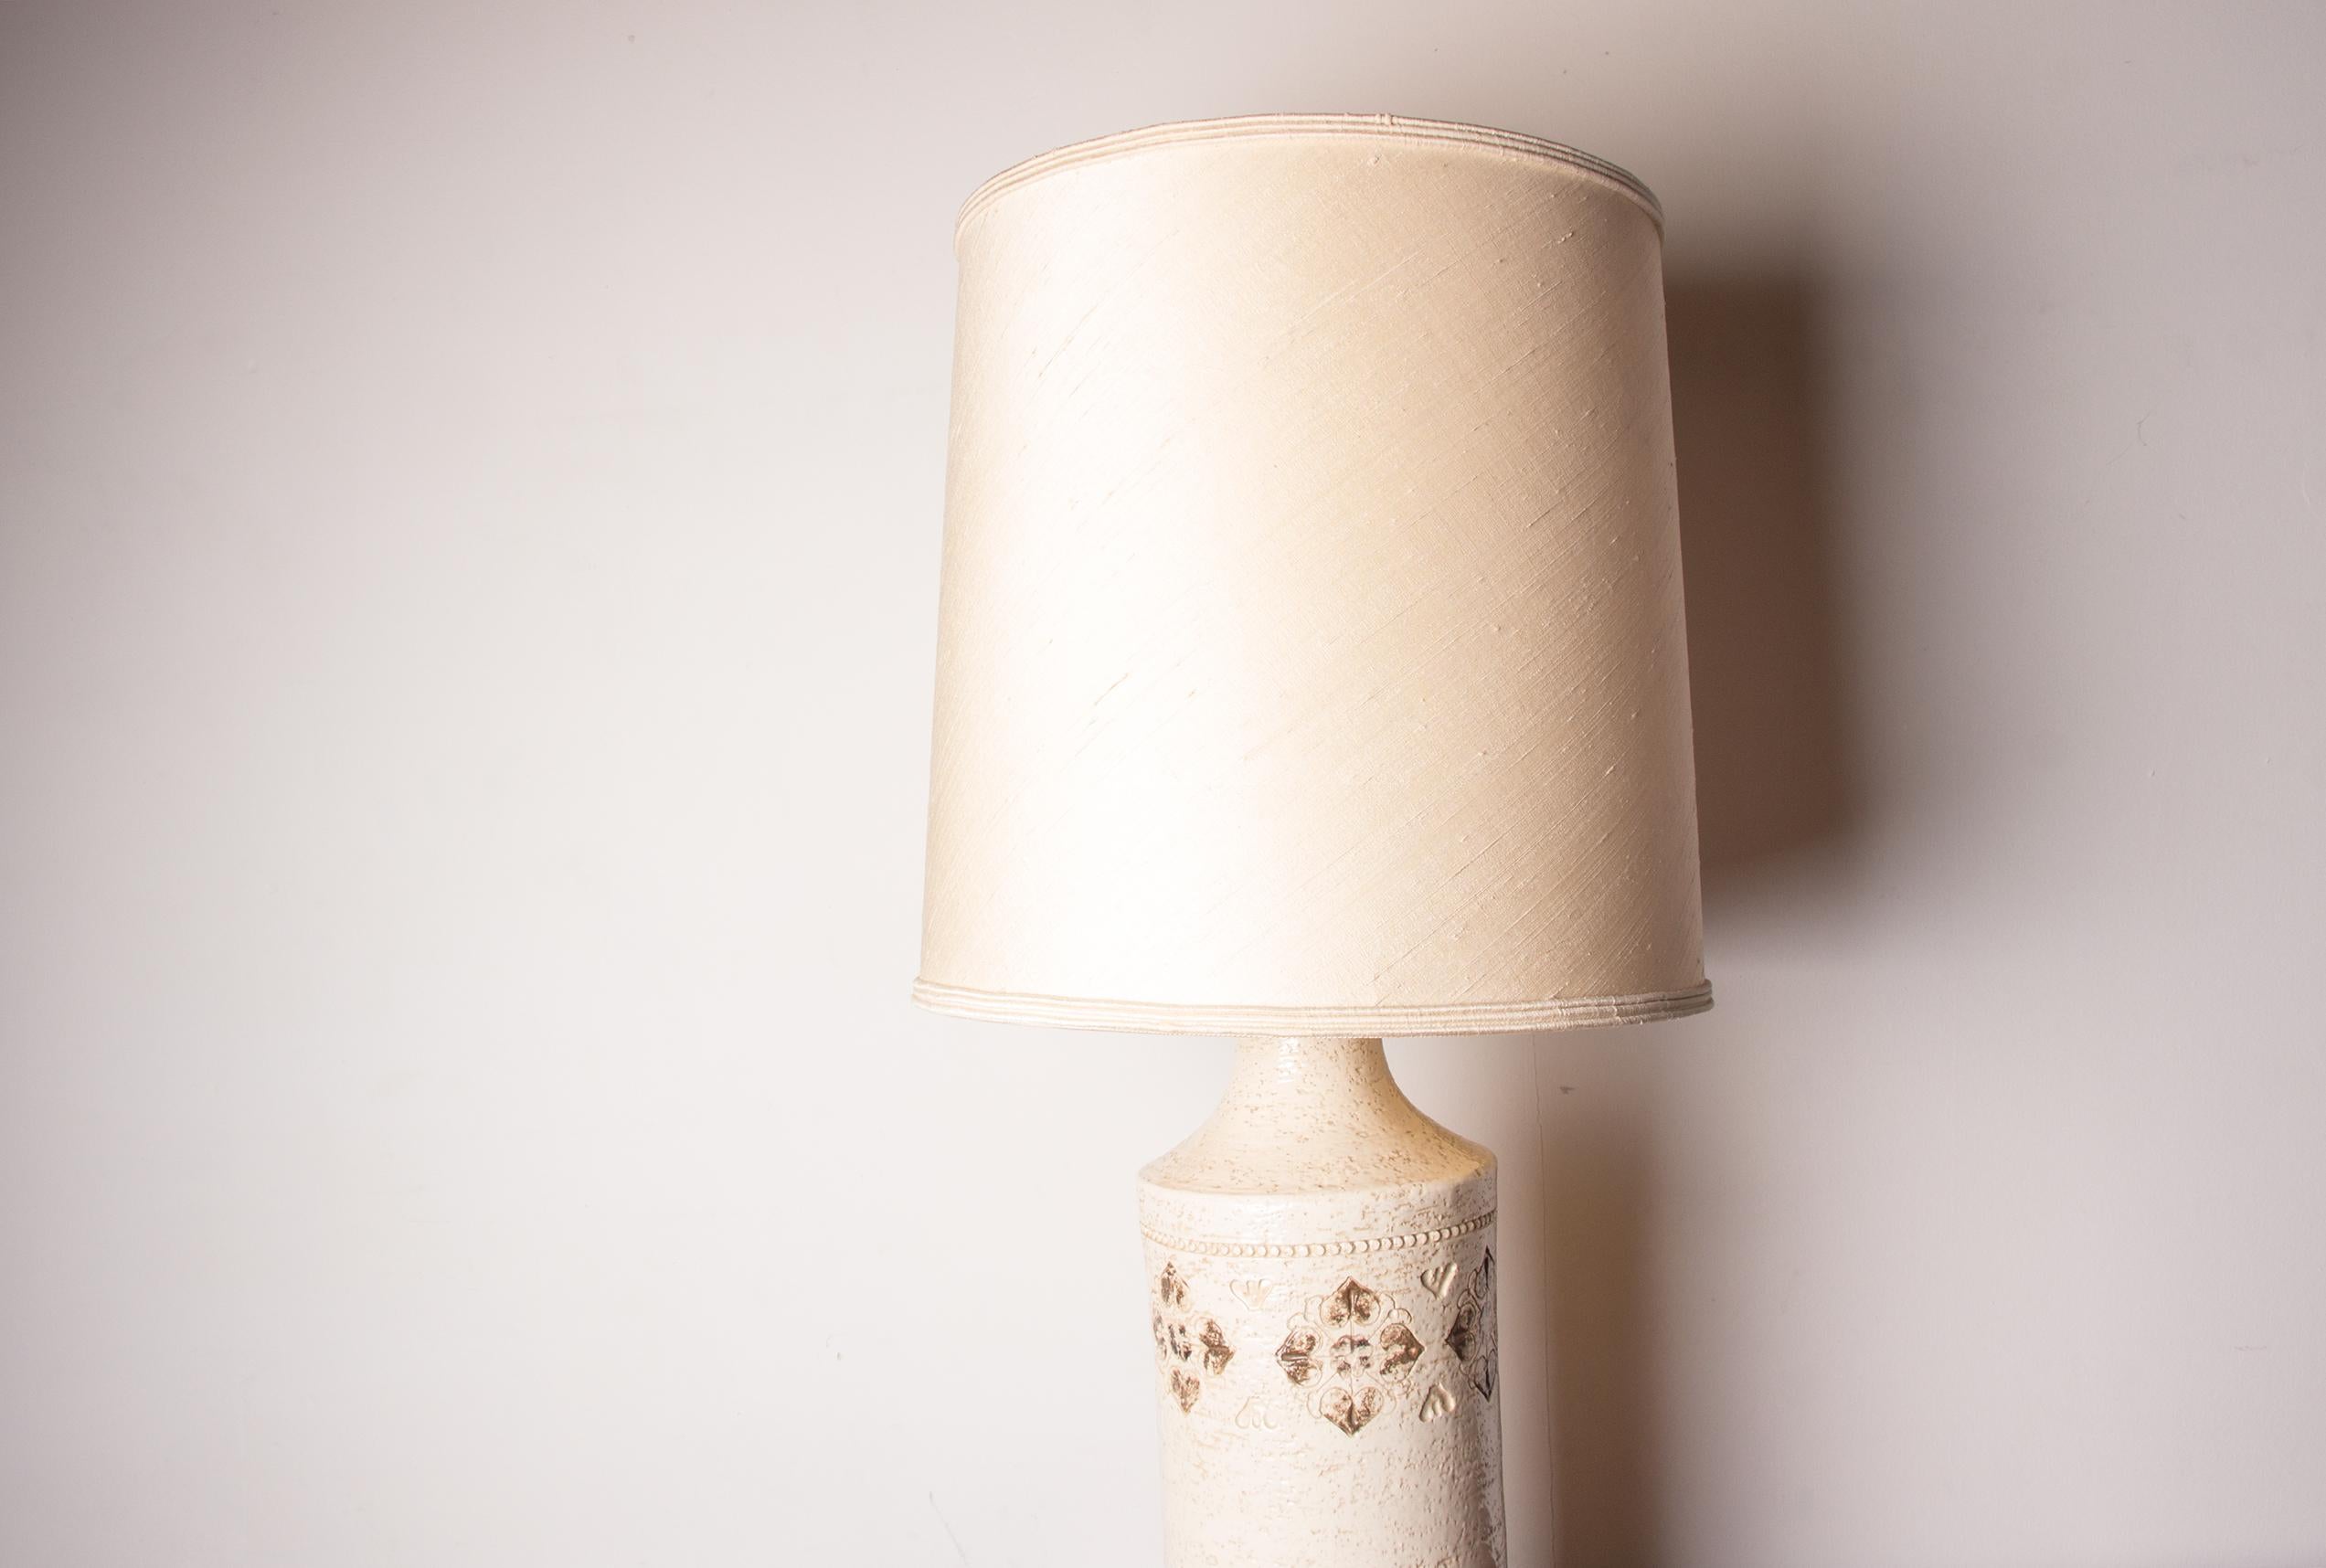 Superb Scandinavian lamp for living room or office. Very elegant cylindrical structure in sandstone topped by a delicate lampshade. Sober design, quality manufacturing. The electrical system has been completely redone in a “vintage” style.